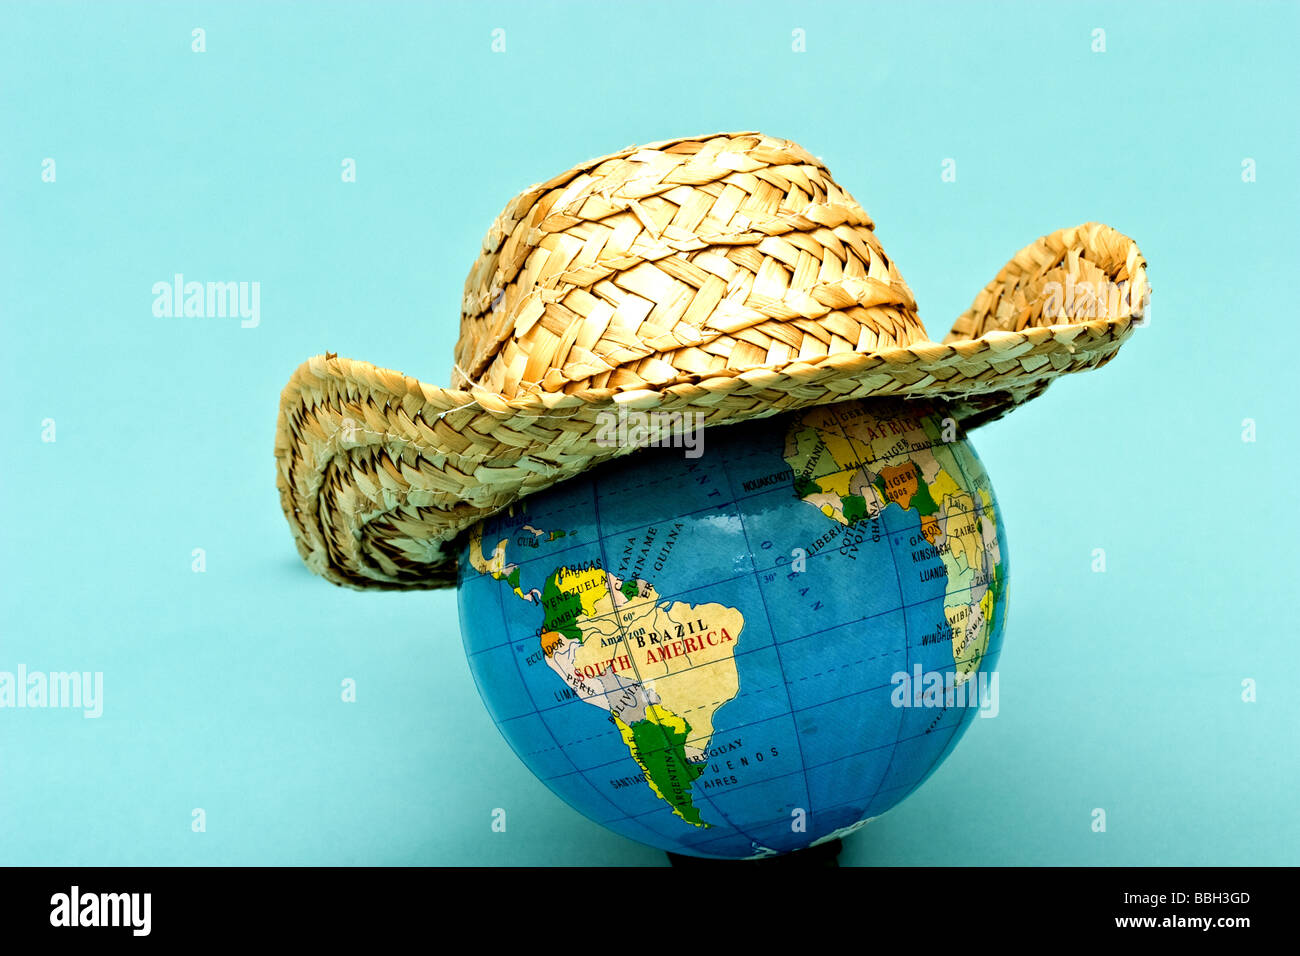 Straw hat on top of a small world globe Stock Photo